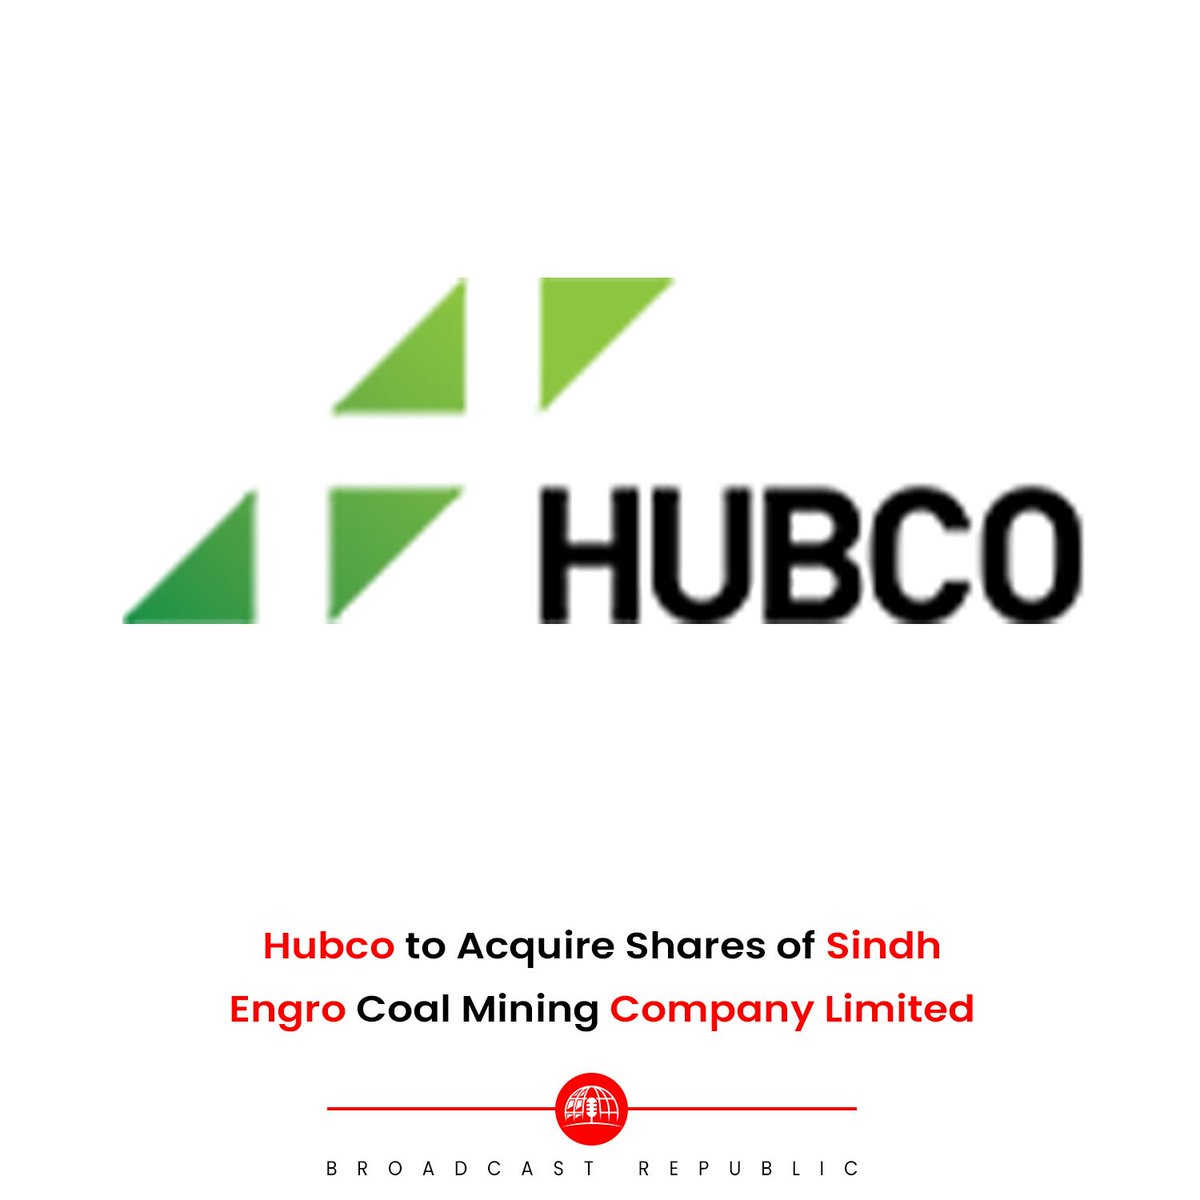 Hub Power Company Limited (HUBC) has revealed its intention to negotiate and execute definitive agreements for the acquisition of shares in Sindh Engro Coal Mining Company Limited. 

#BroadcastRepublic #HUBCO #HubPowerCompany #AcquisitionNews #CorporateDevelopment #FinancialNews